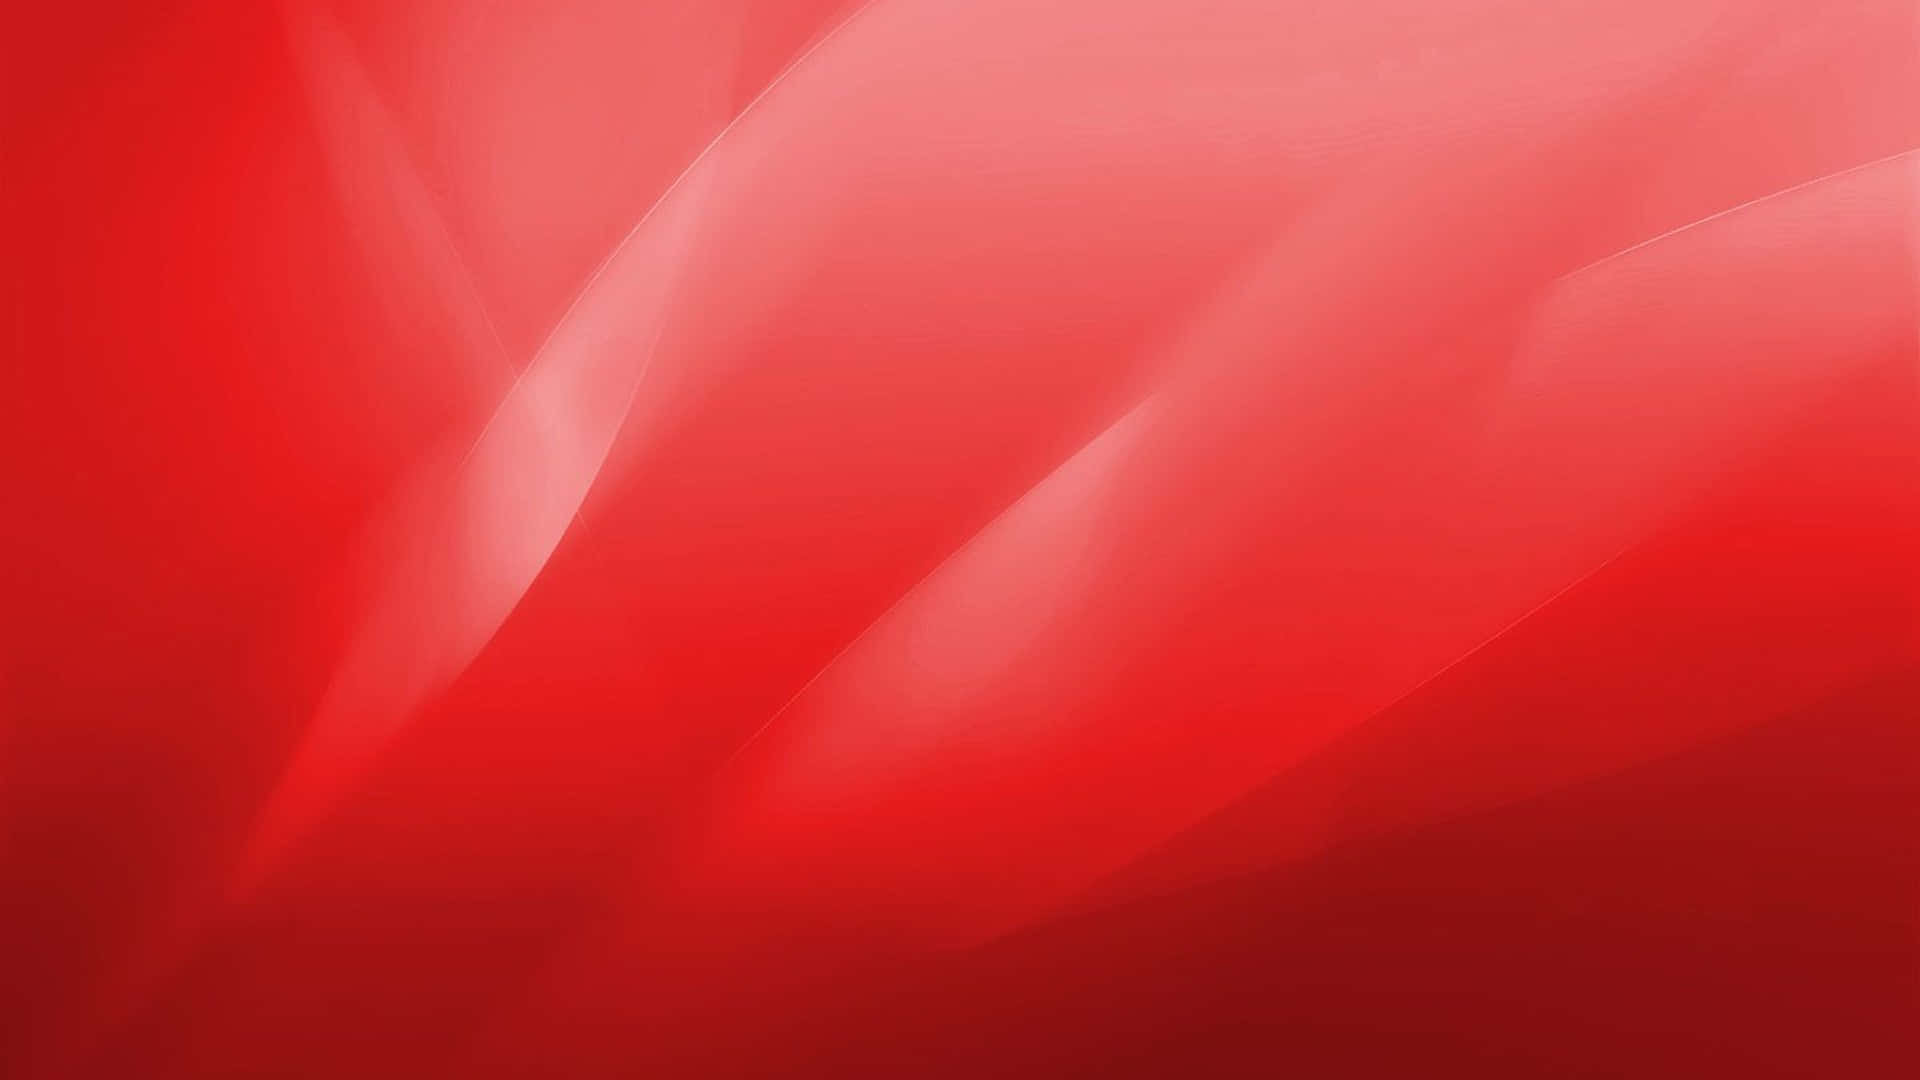 Light Red Aesthetic Abstract Background Wallpaper